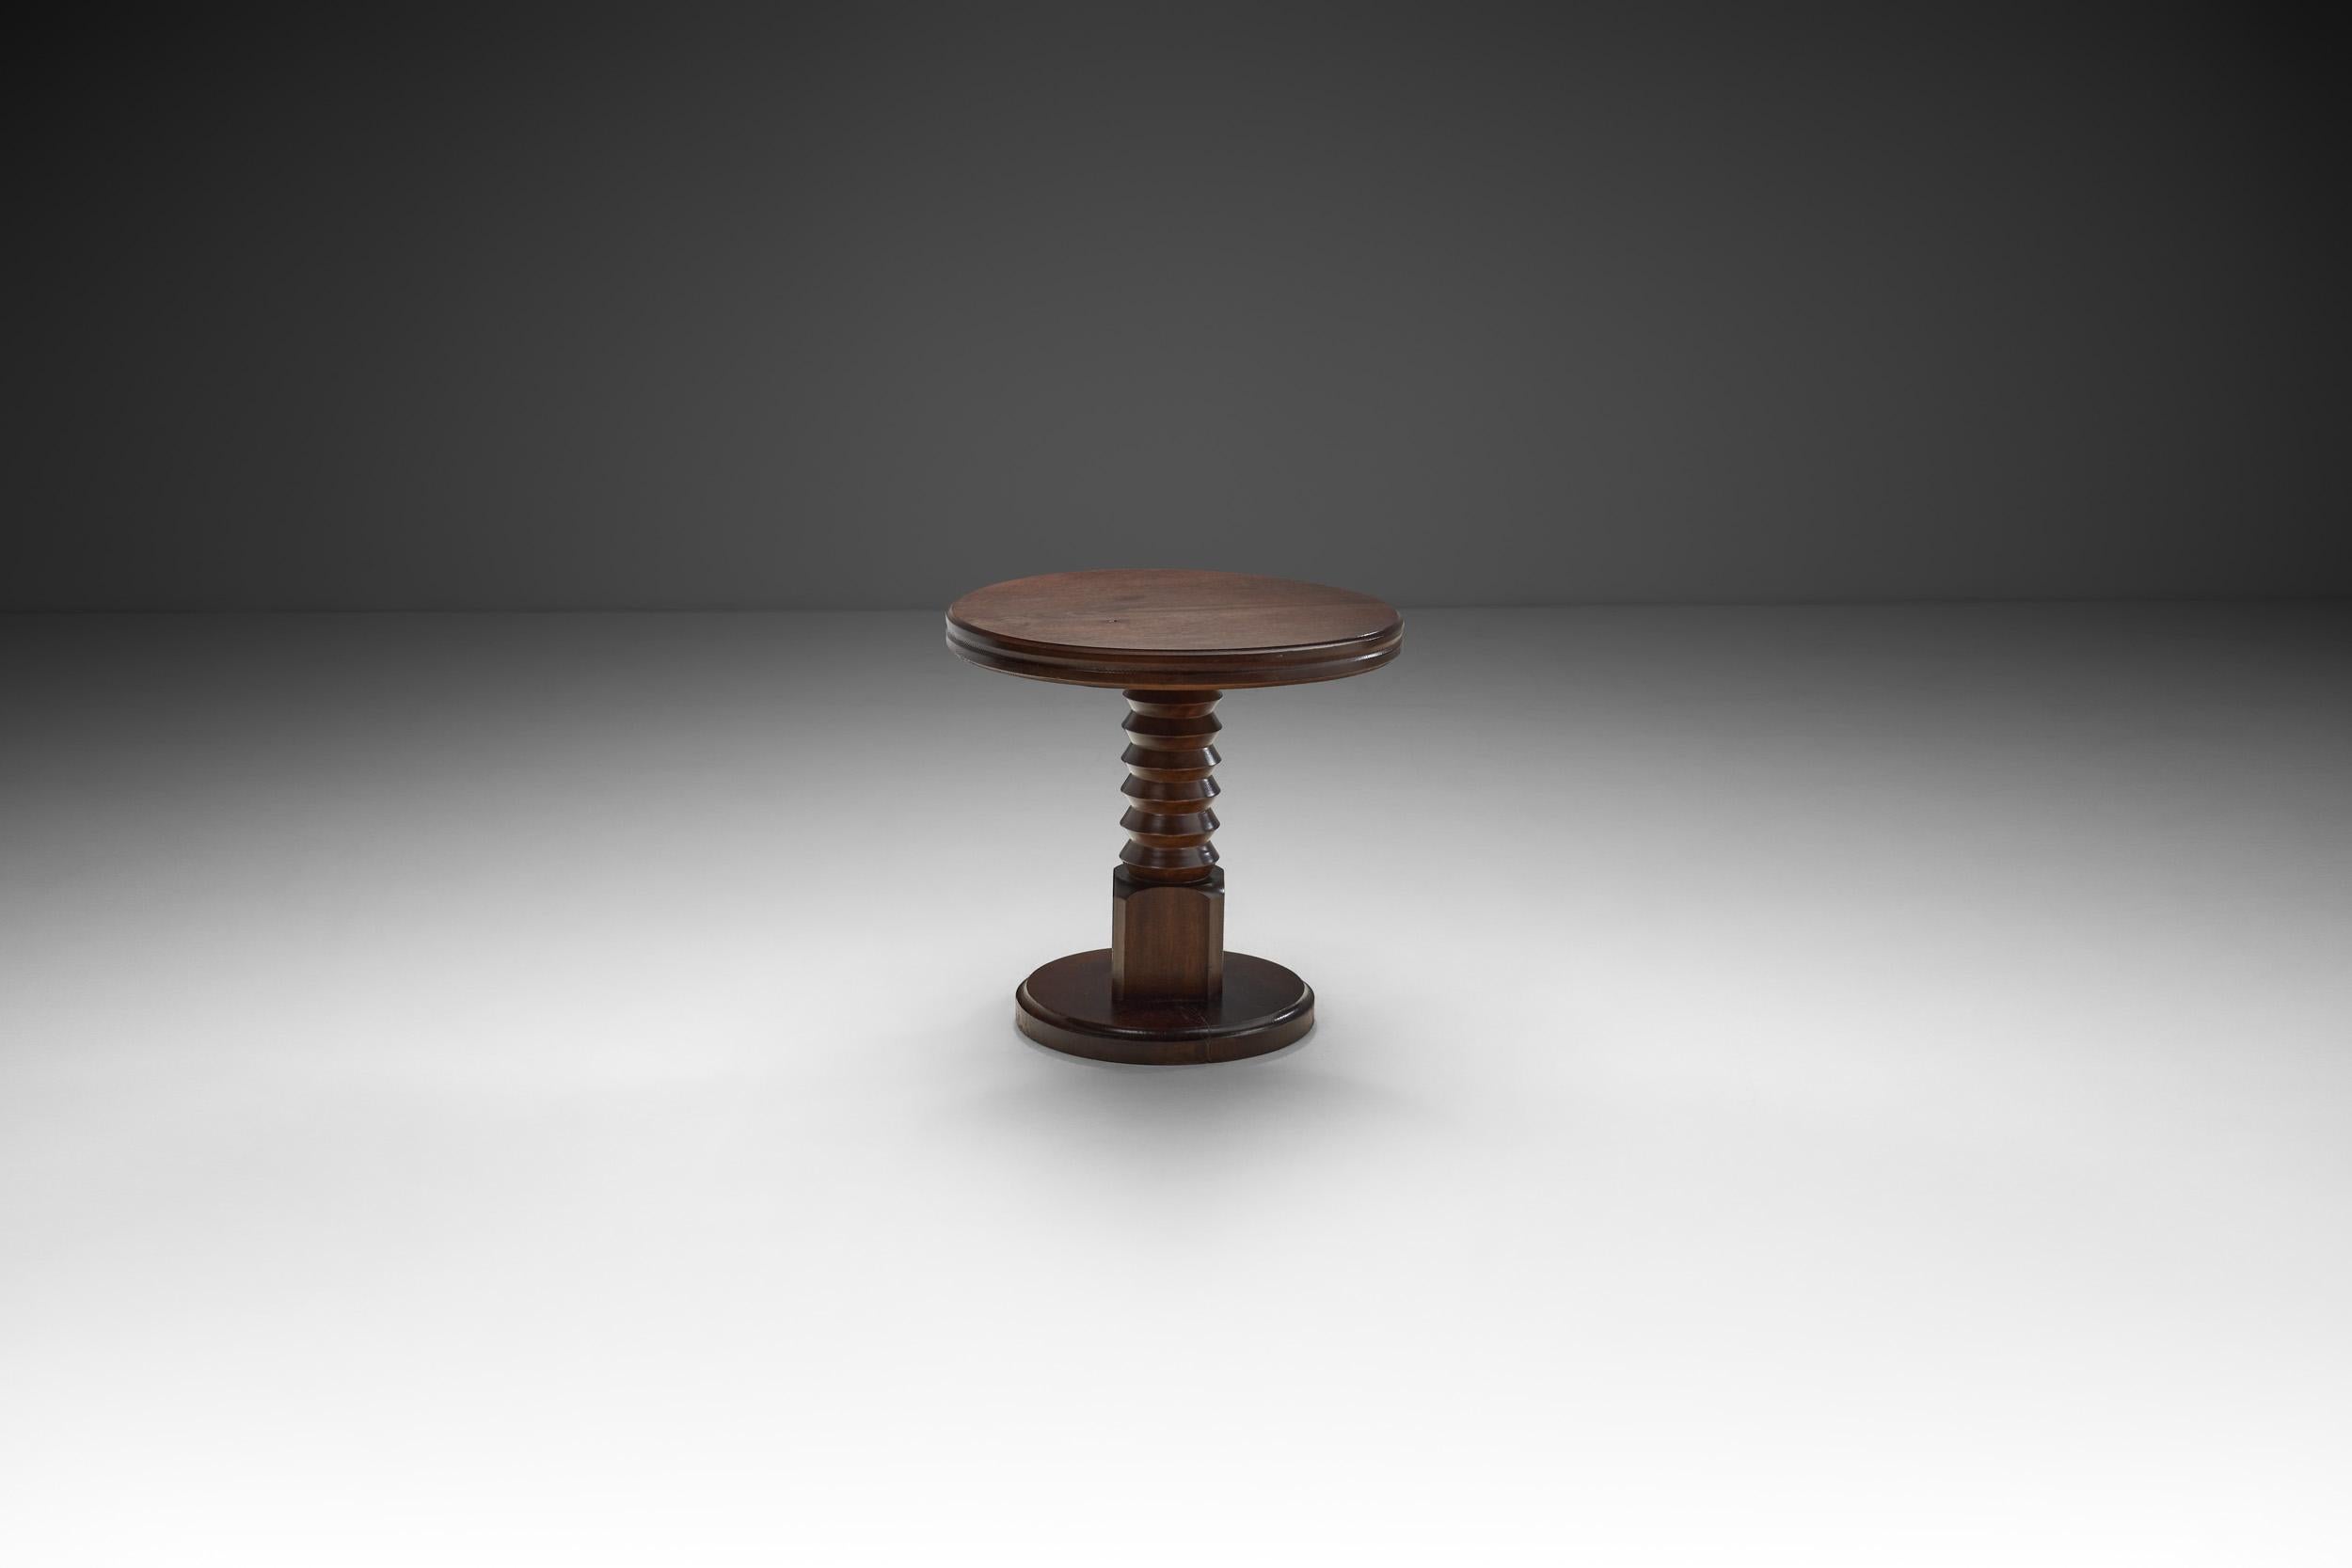 Sculptural Solid Wood Side Table with Column Base, Europe ca 1940s In Good Condition For Sale In Utrecht, NL